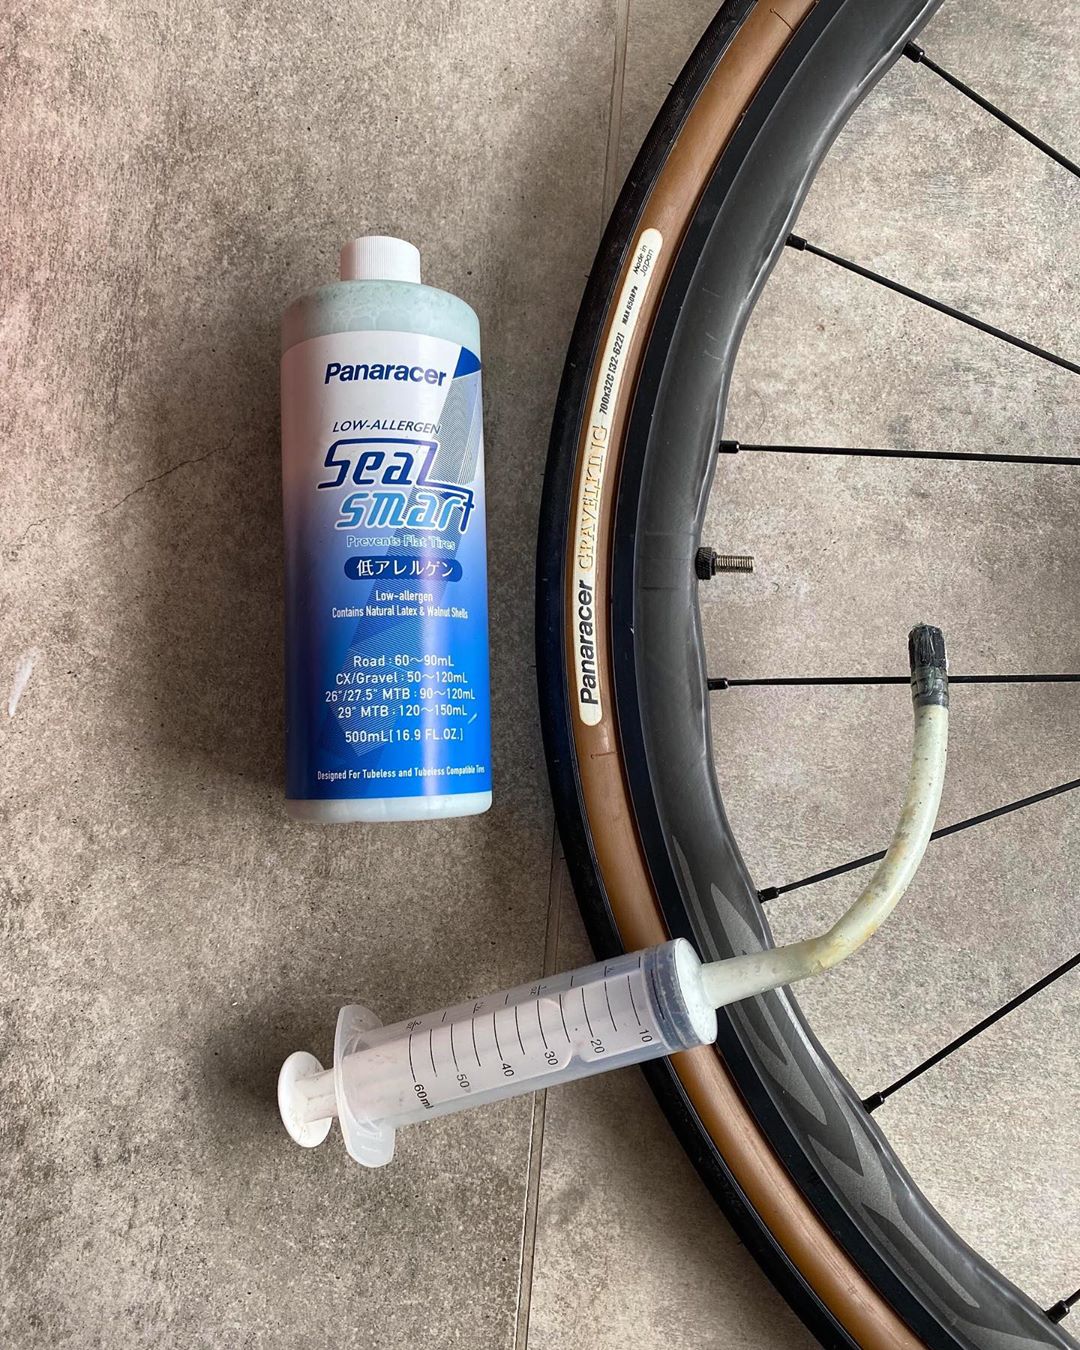 Tubeless sealant with a Panaracer tires